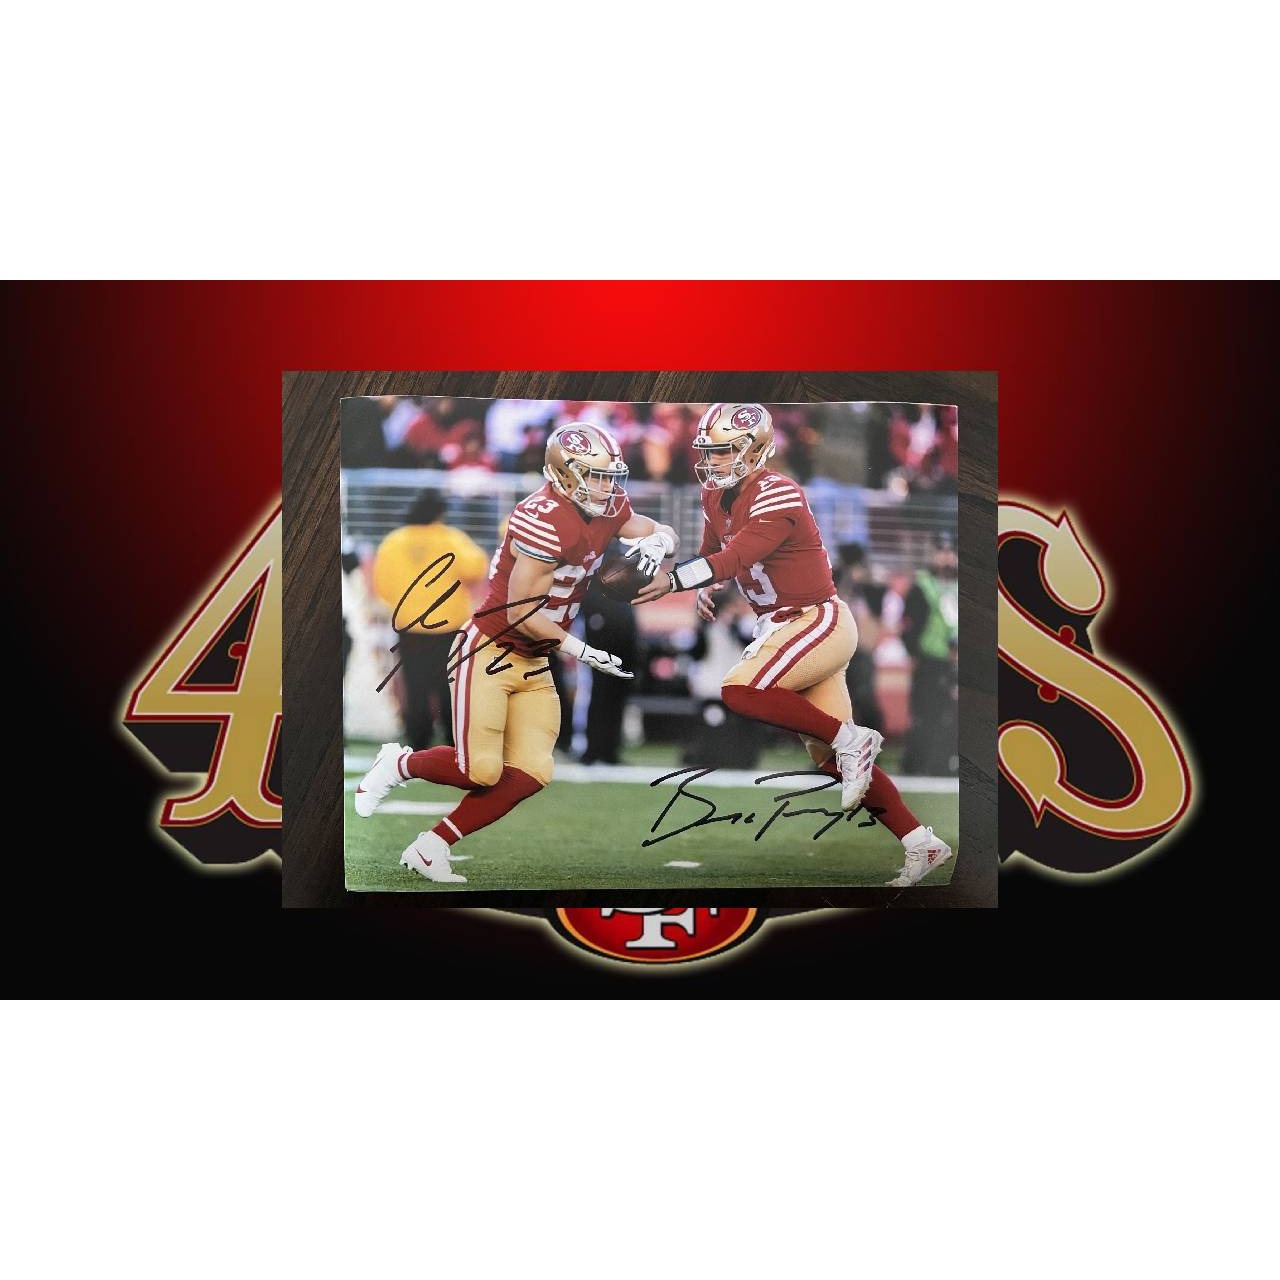 San Francisco 49ers brock purdy and Christian McCaffrey 8x10 photo signed with proof